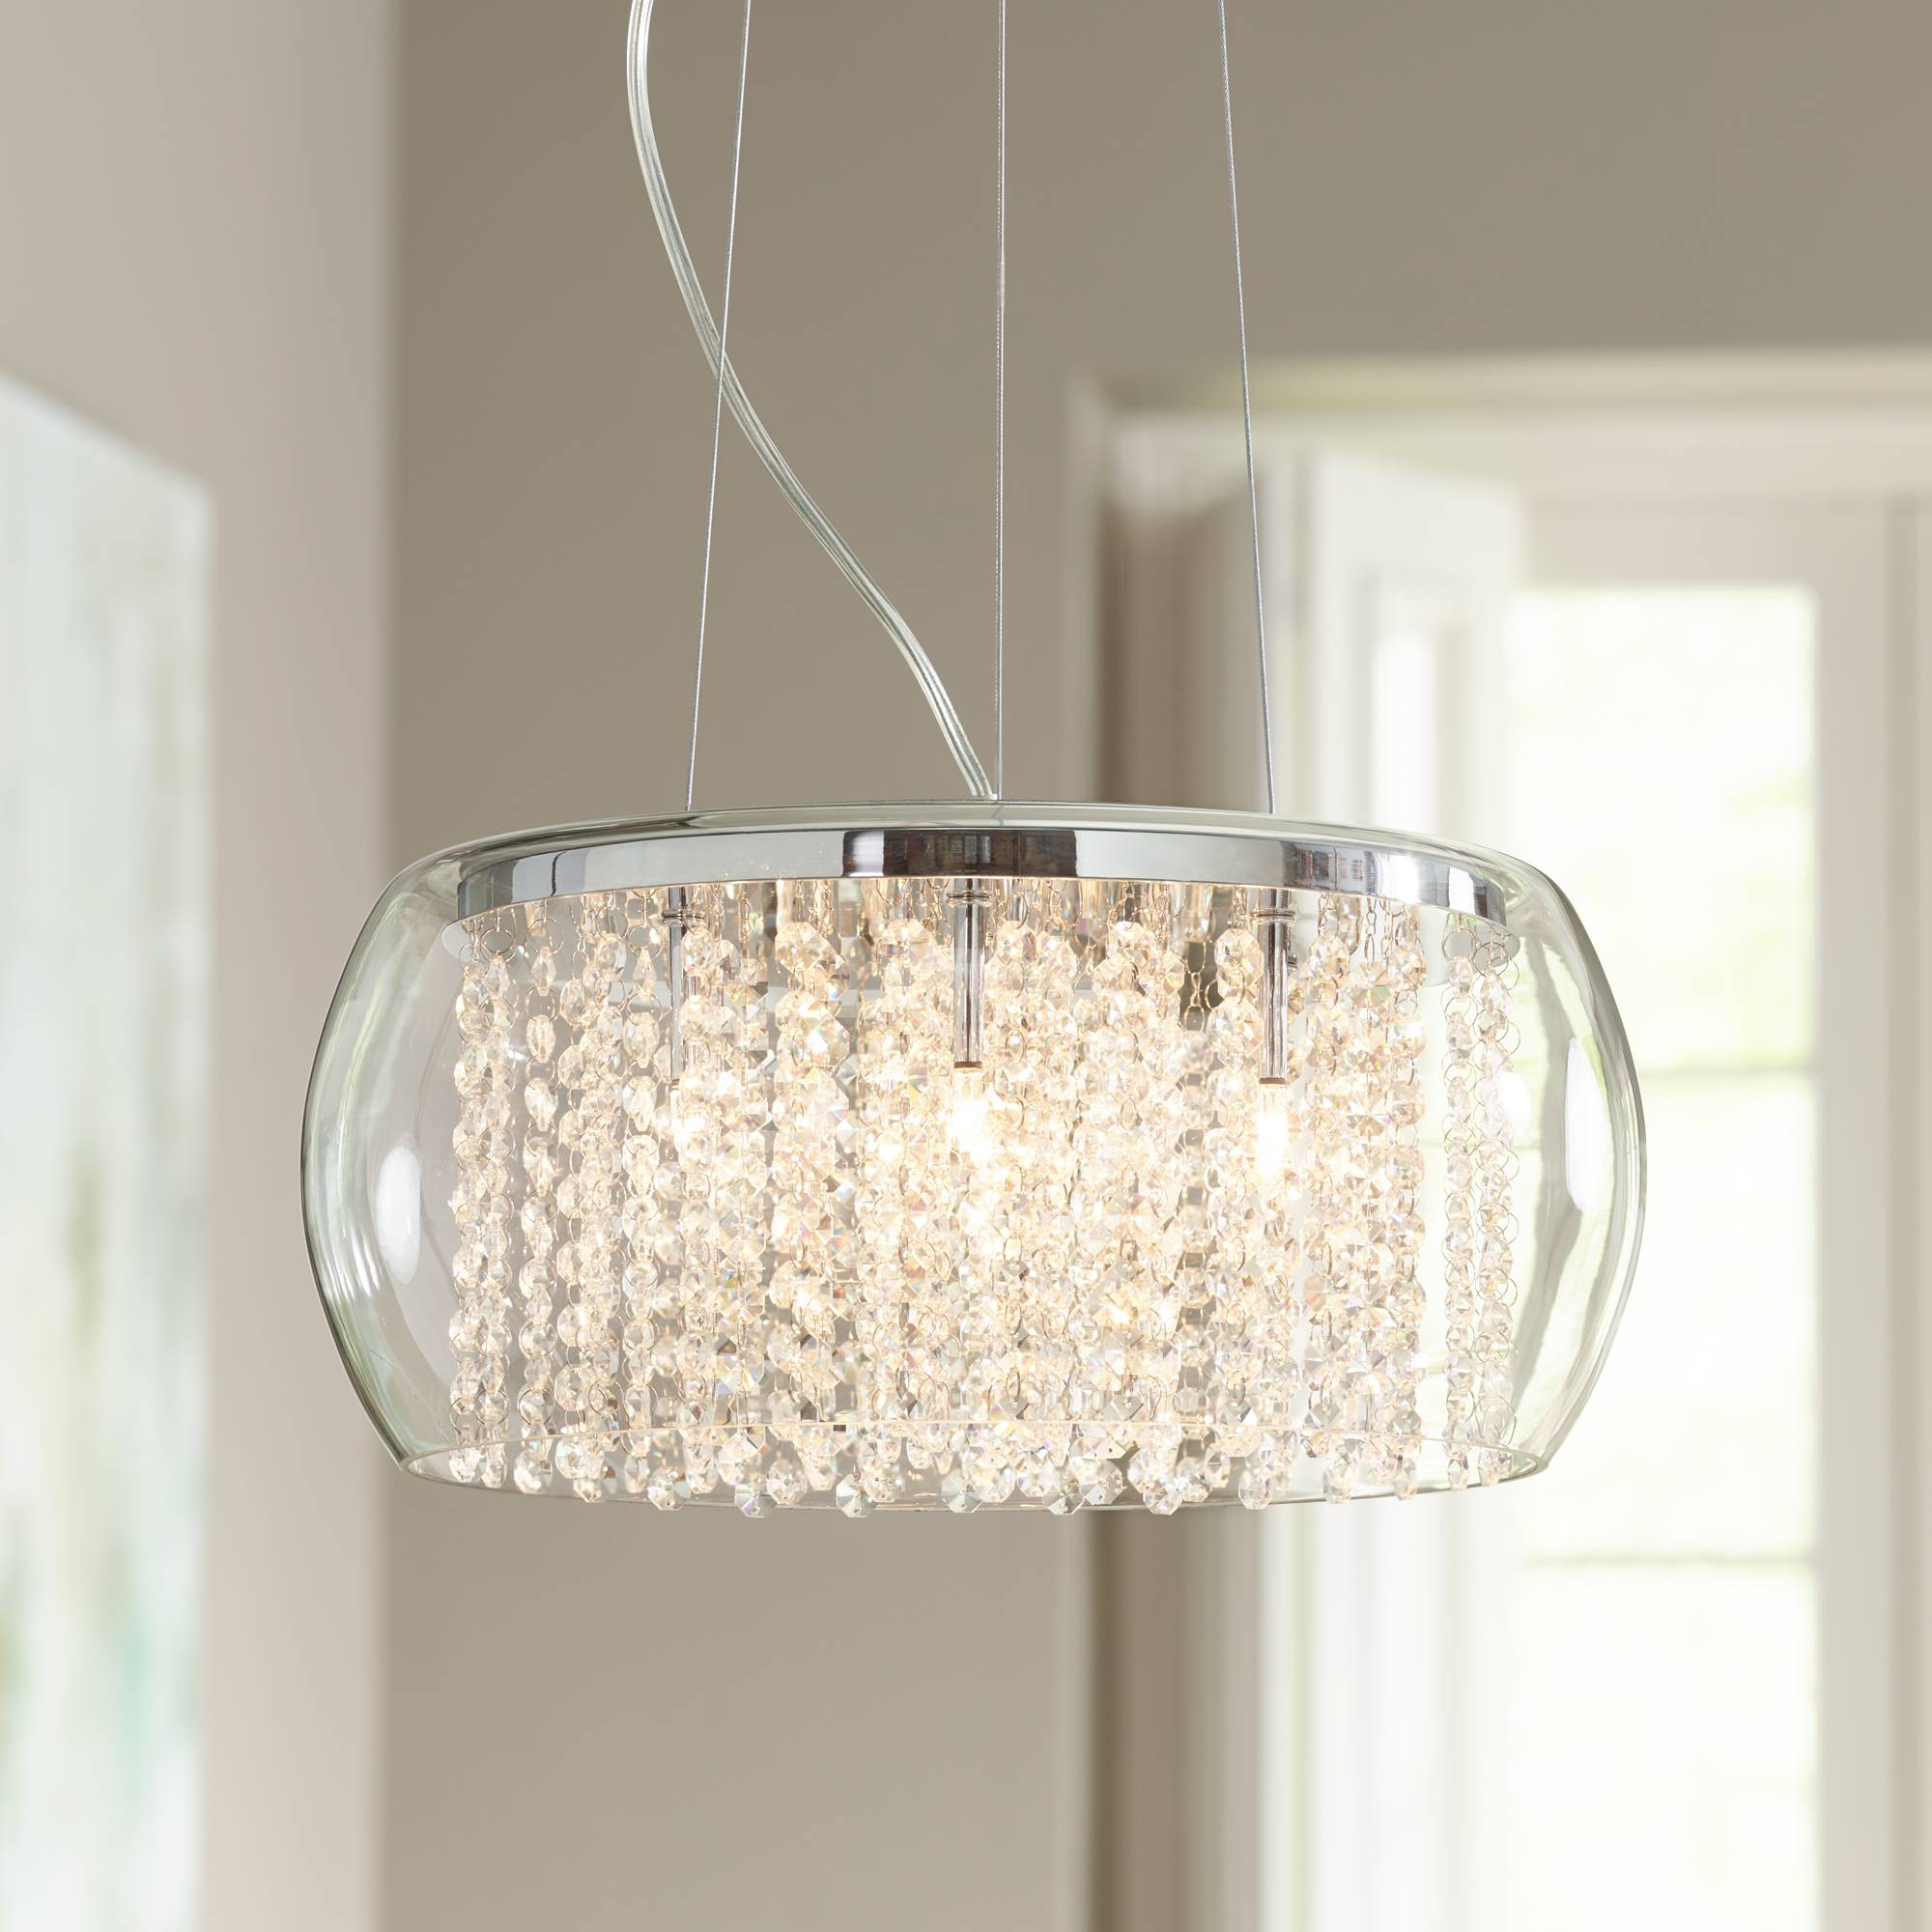 Details About Possini Euro Crystal Rainfall 17 Wide Glass Drum Chandelier